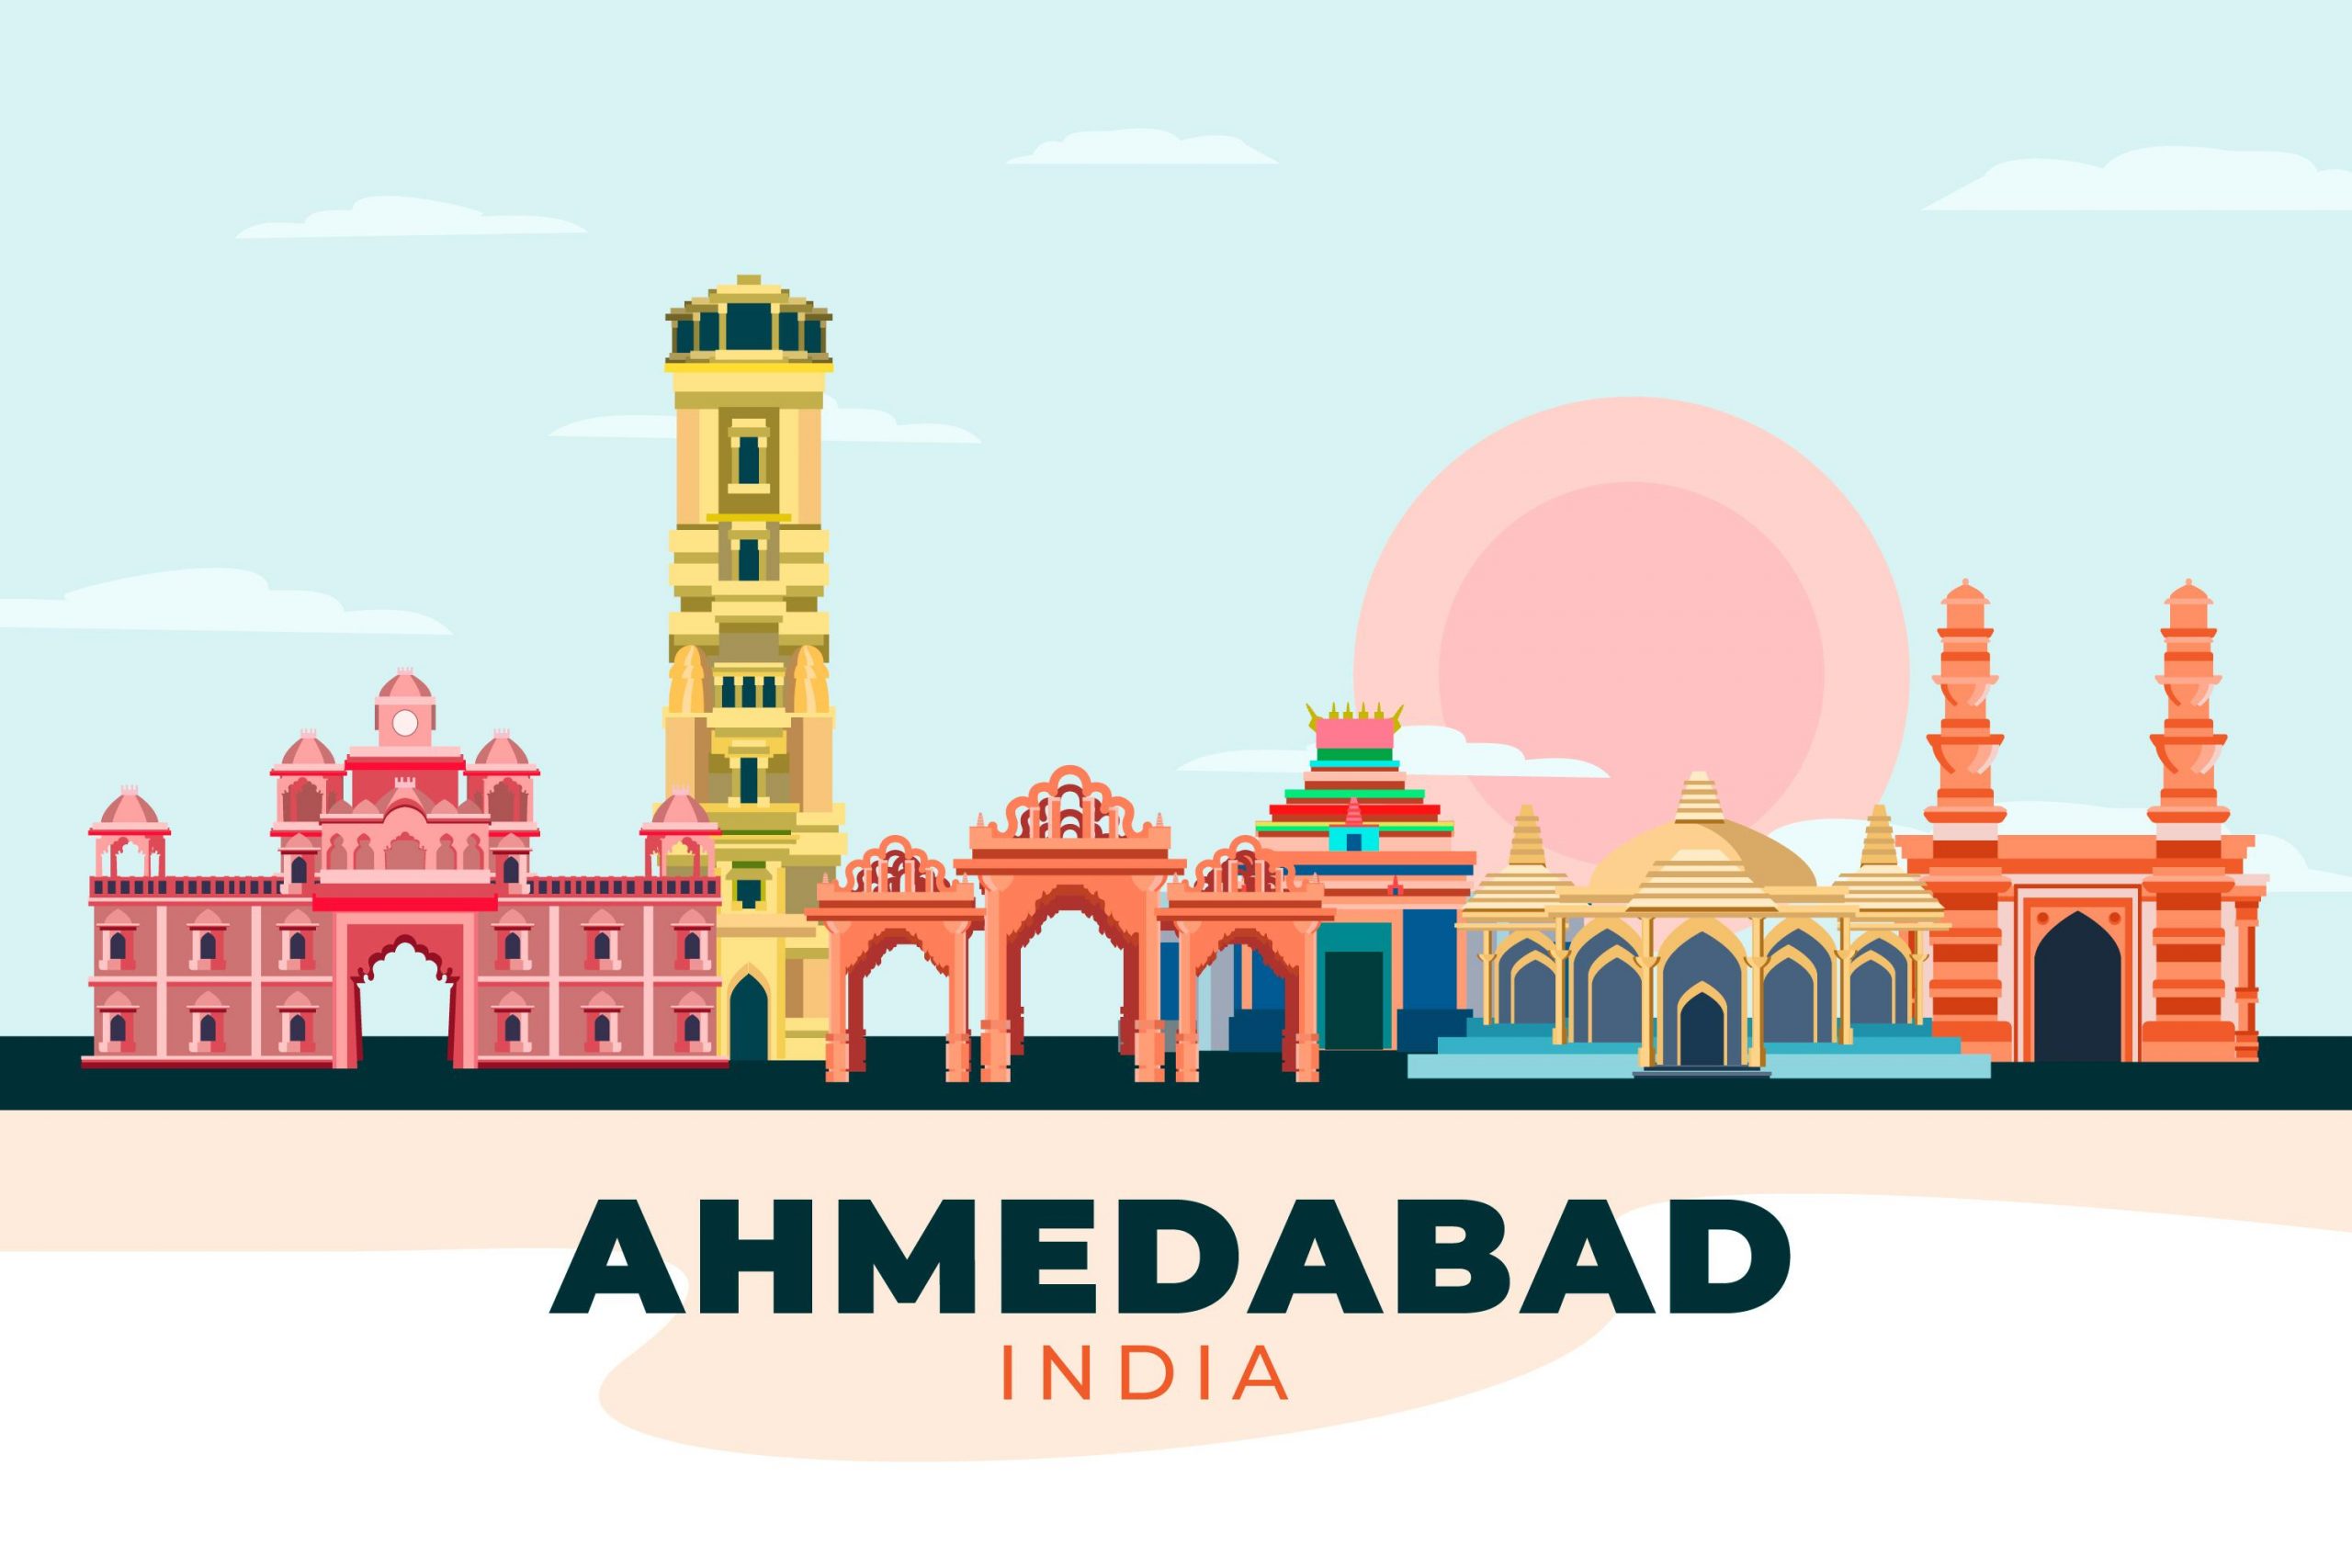 Safest cities for women in India- Ahmedabad